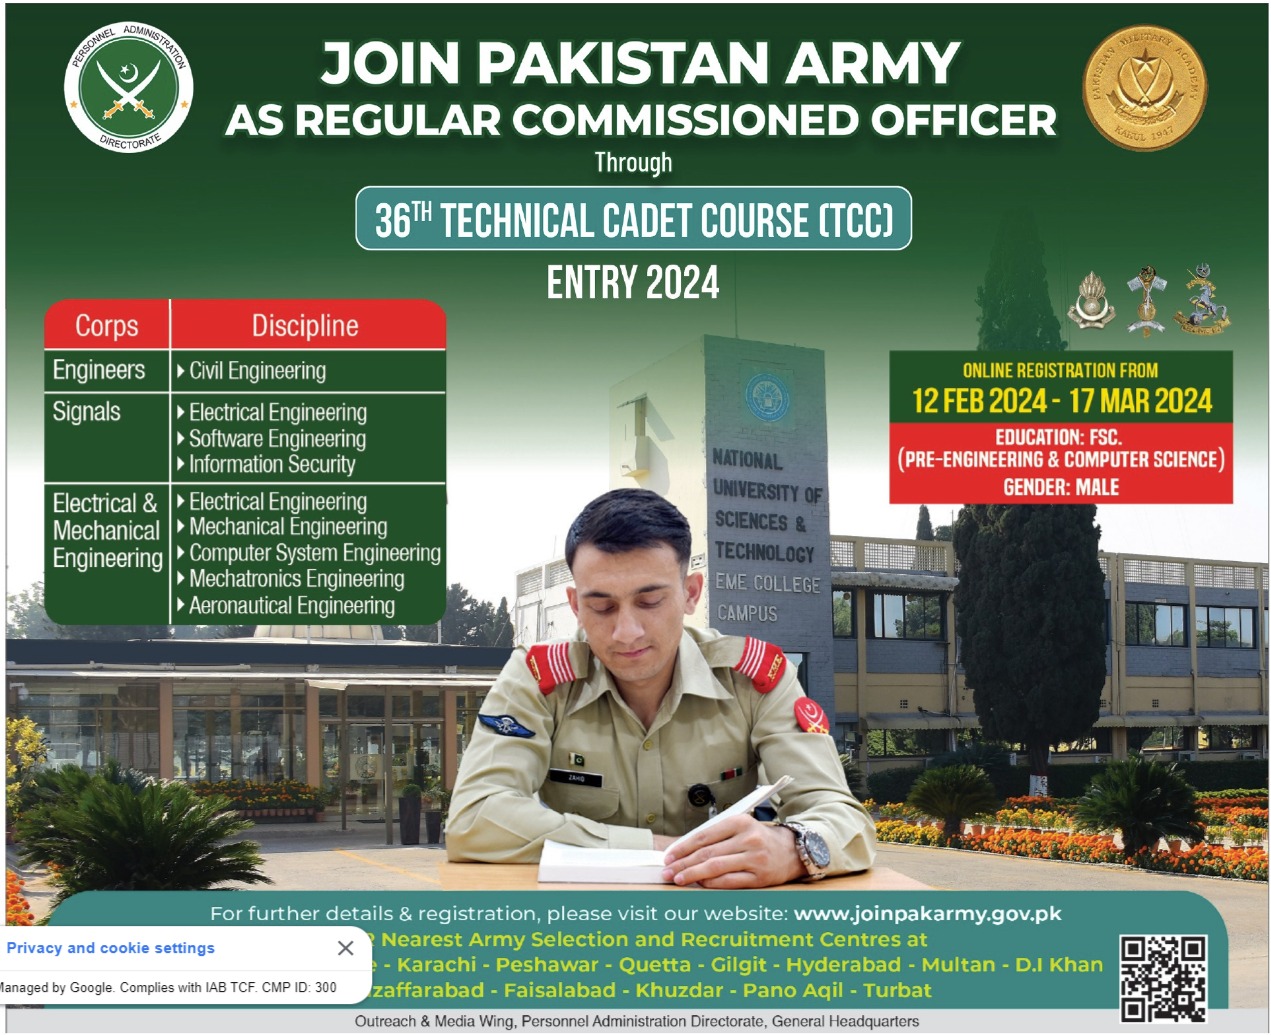 Career Opportunities in the Pakistan Army's Technical Cadet Course 2024